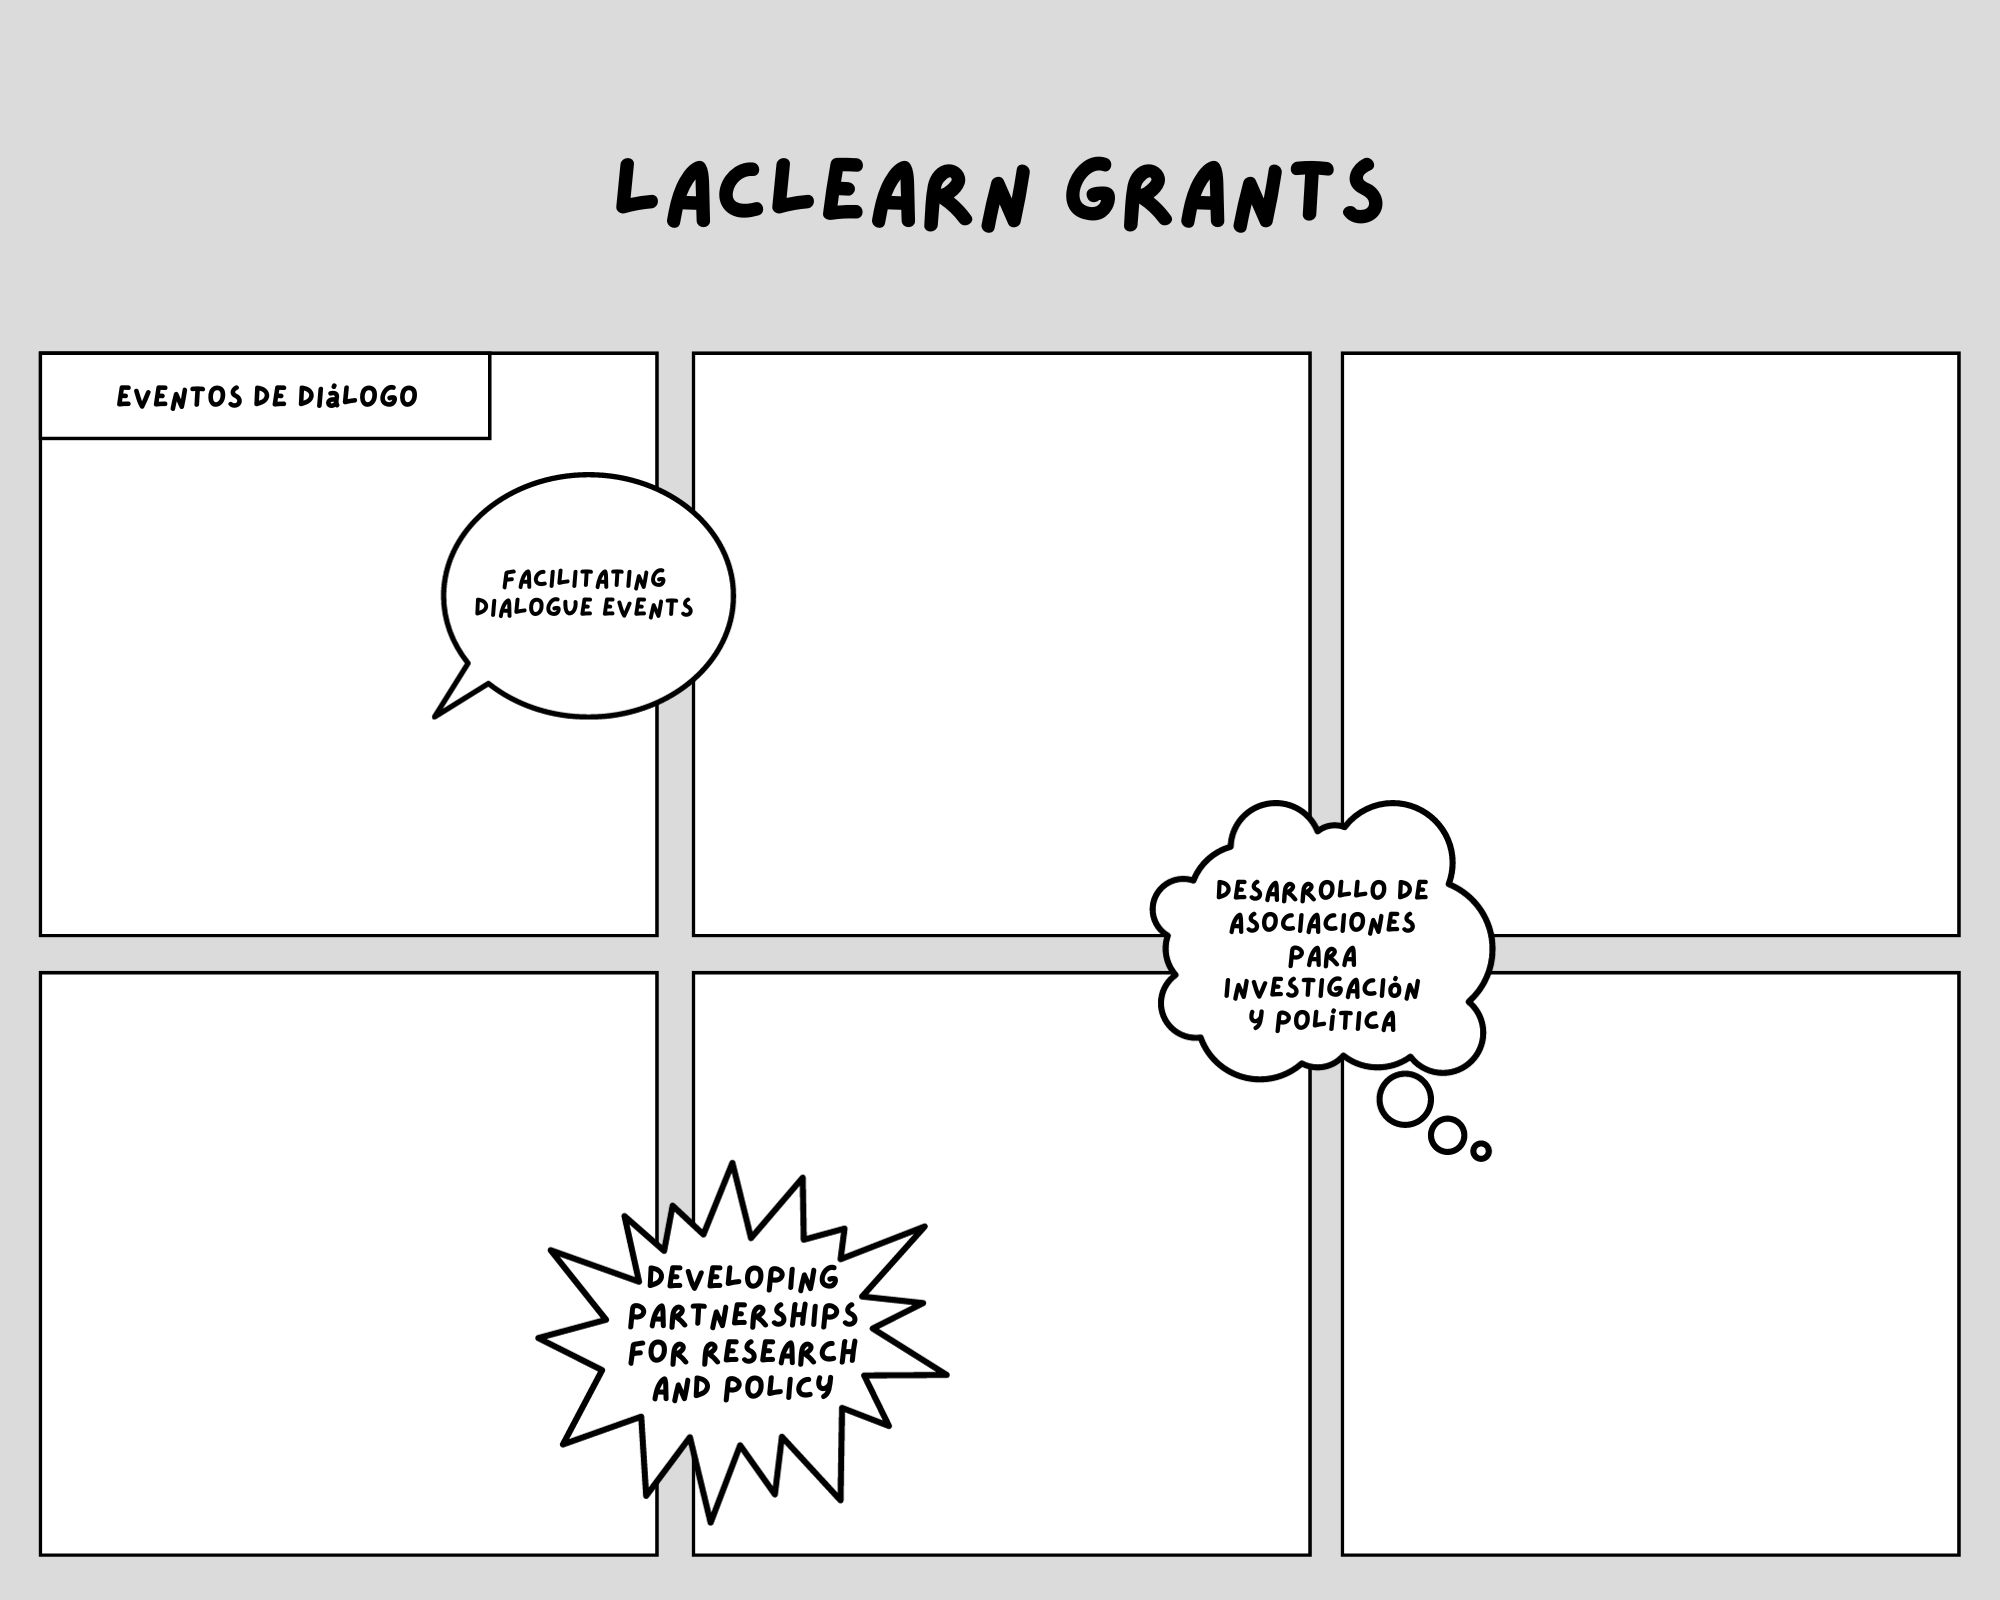 LACLEARN - Two Calls for Grants Published